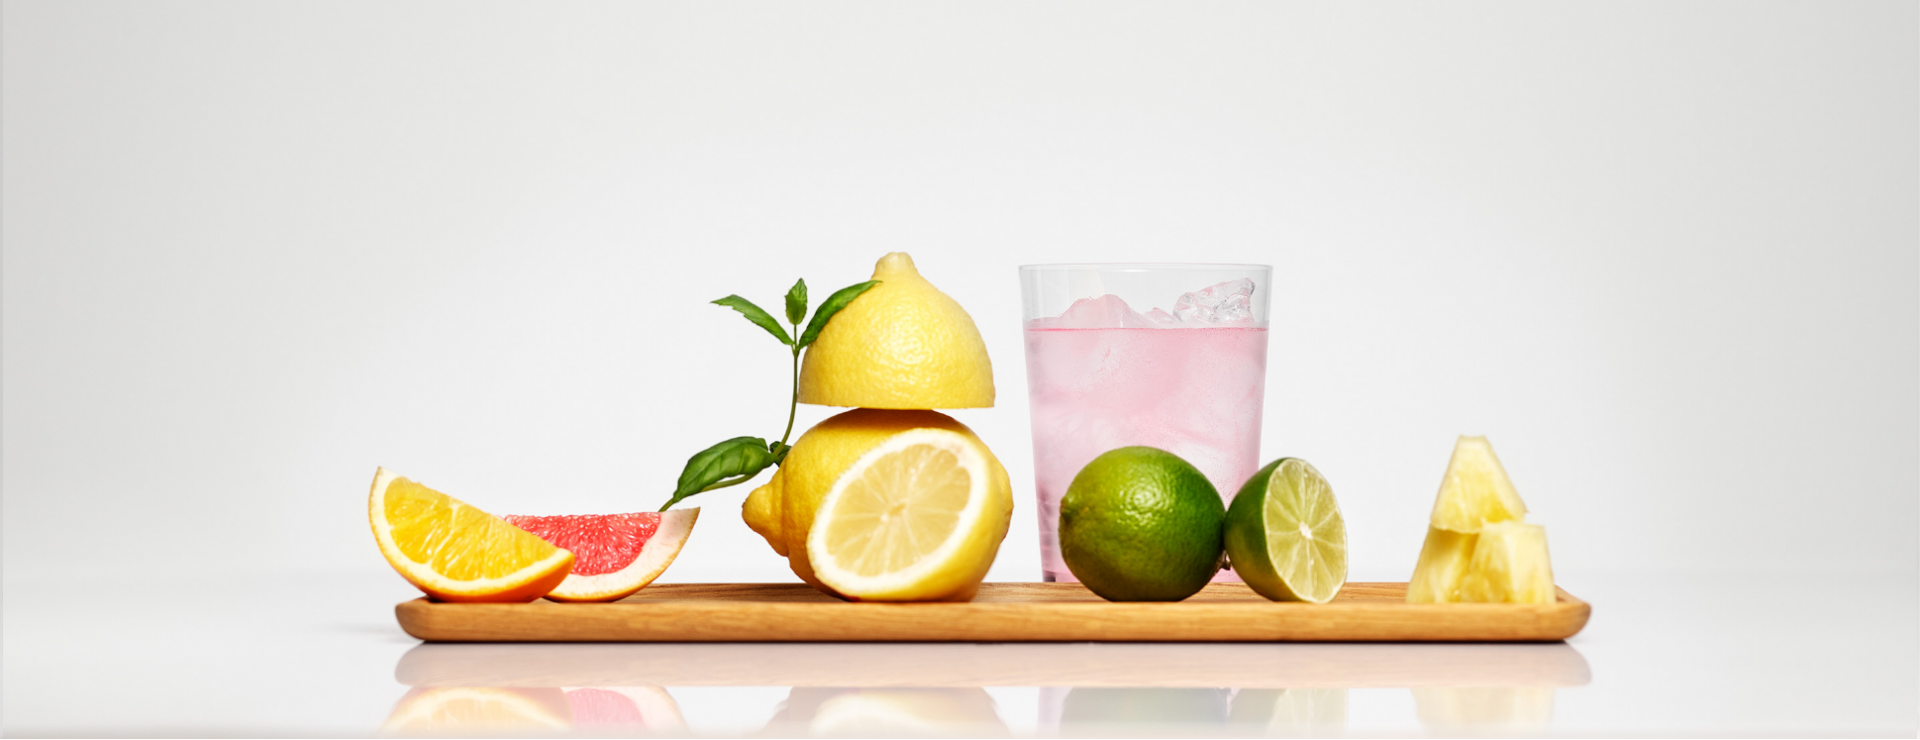 A glass of Mysoda sparkling drink on a board full of citrus fruit and pineapple pieces in a minimalistic setting in front of a white background